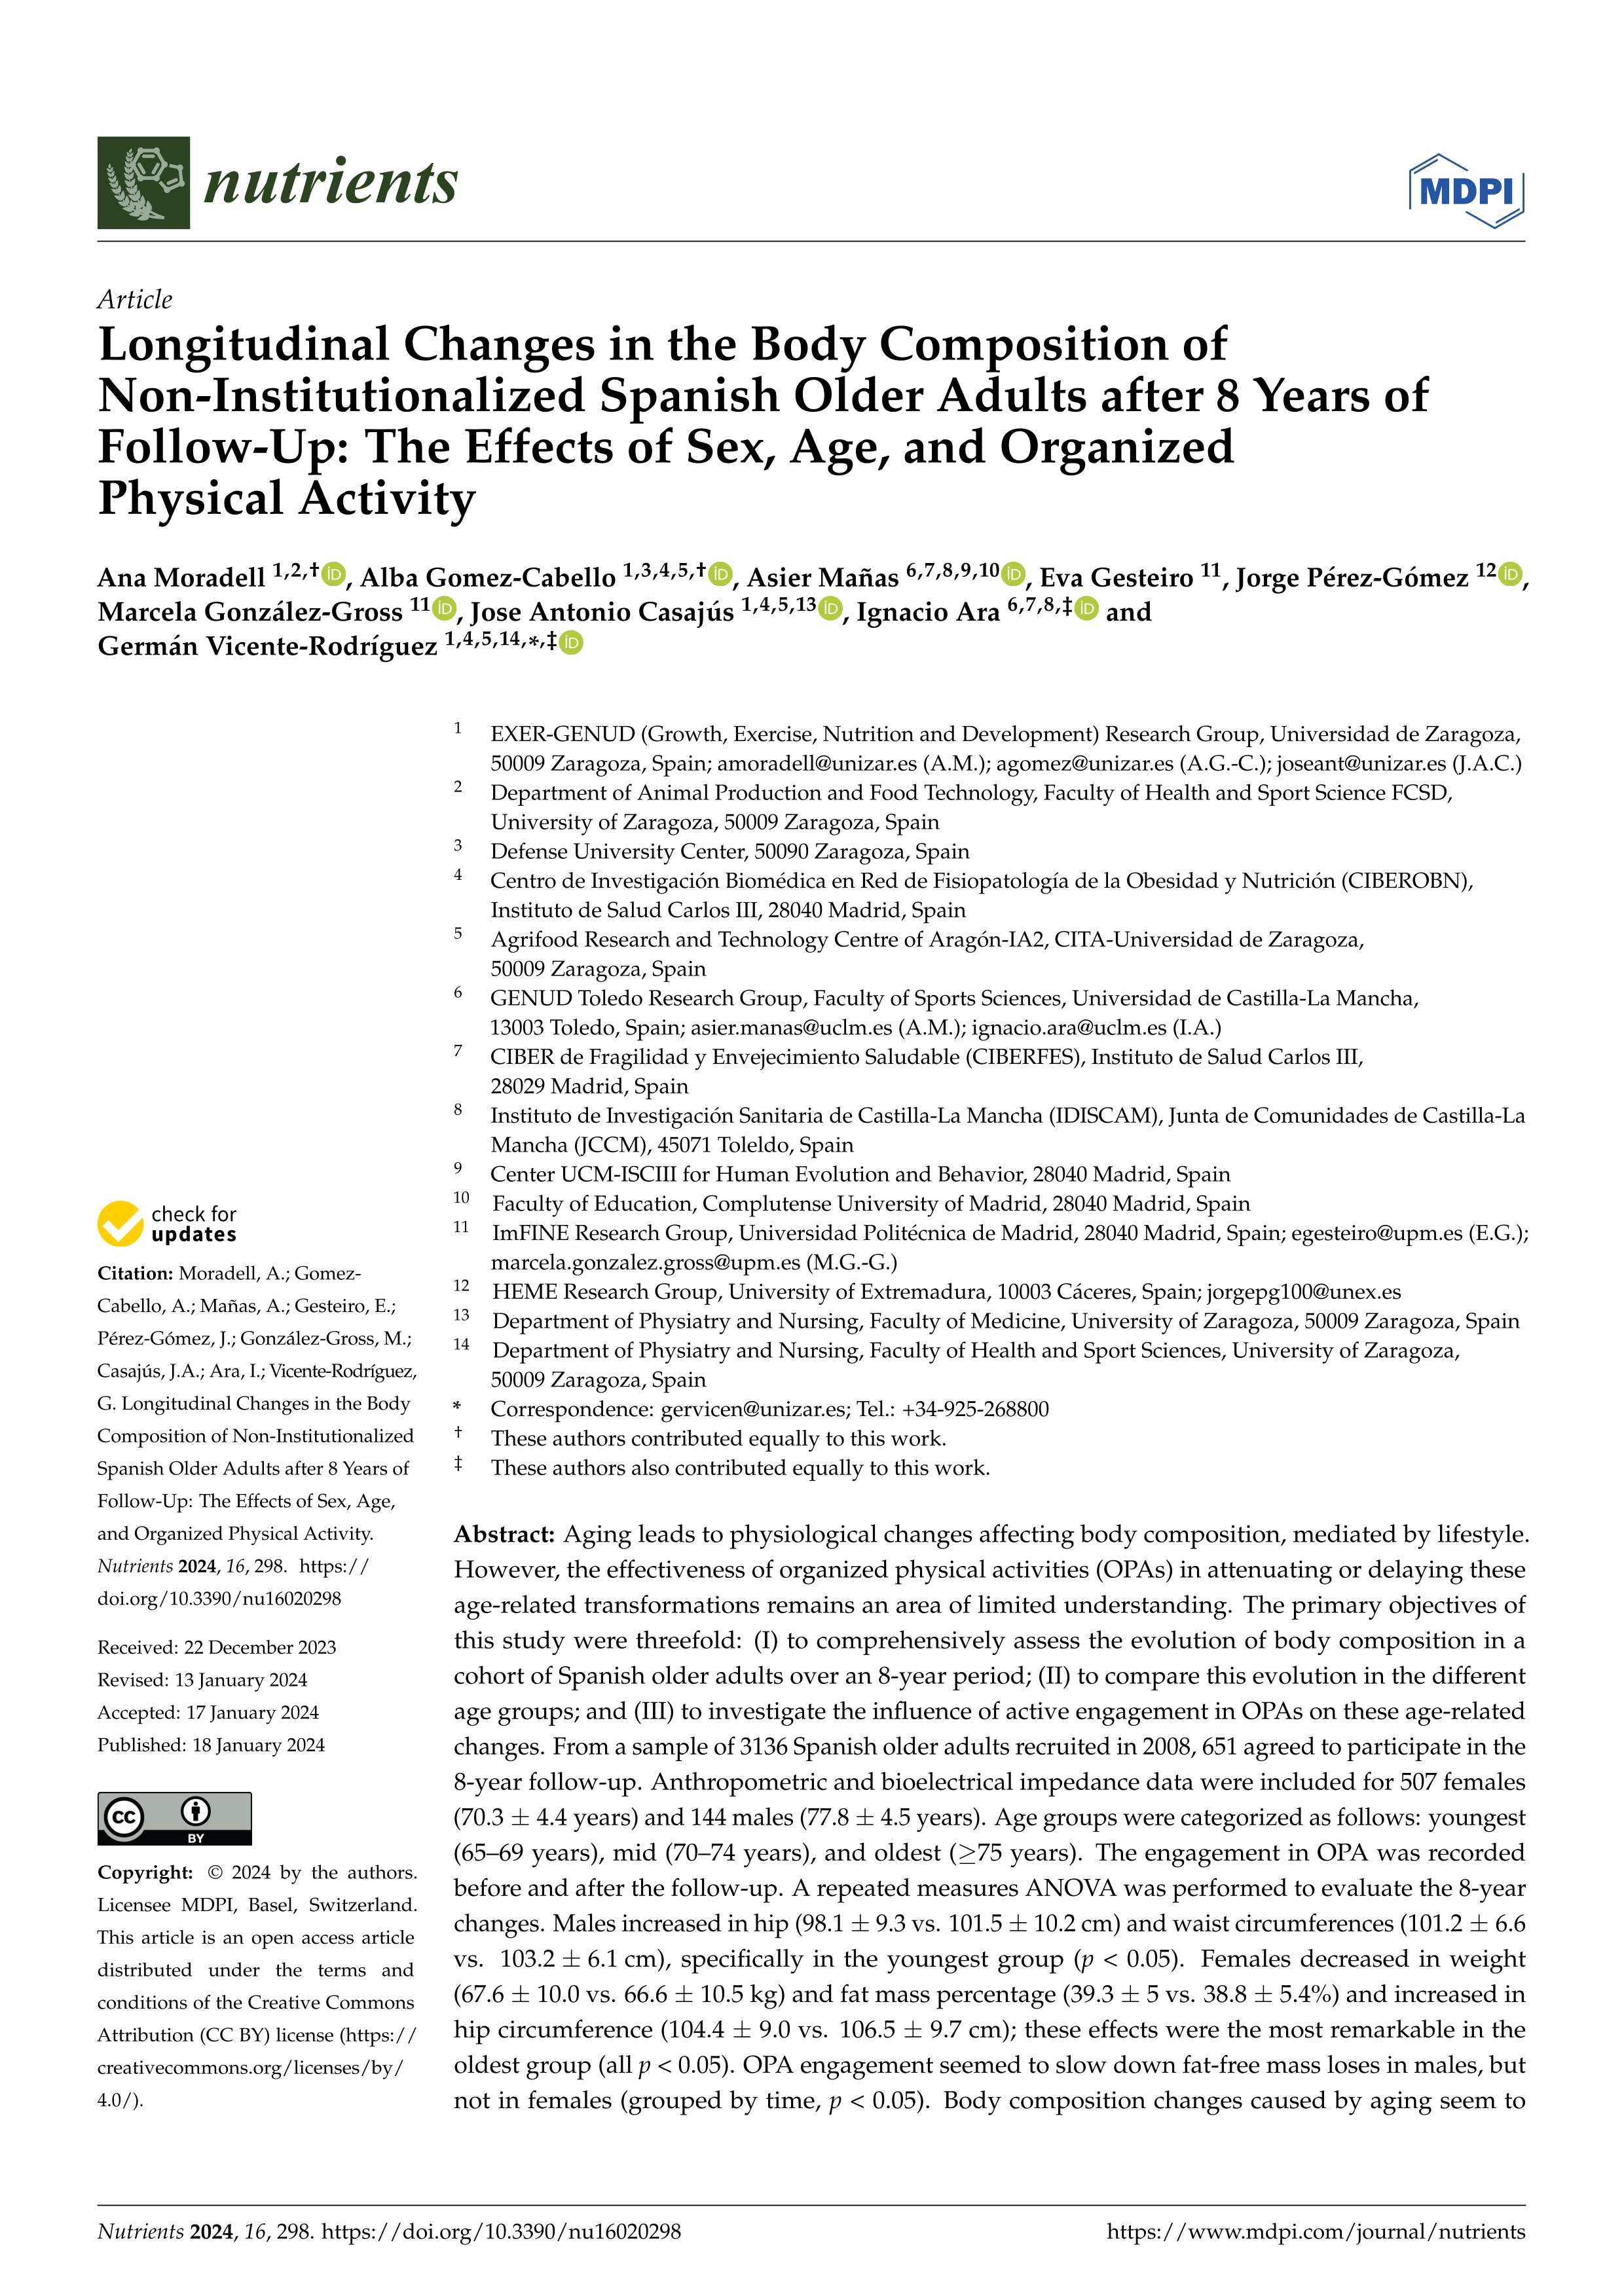 Longitudinal changes in the body composition of non-institutionalized spanish older adults after 8 years of follow-up: the effects of sex, age, and organized physical activity